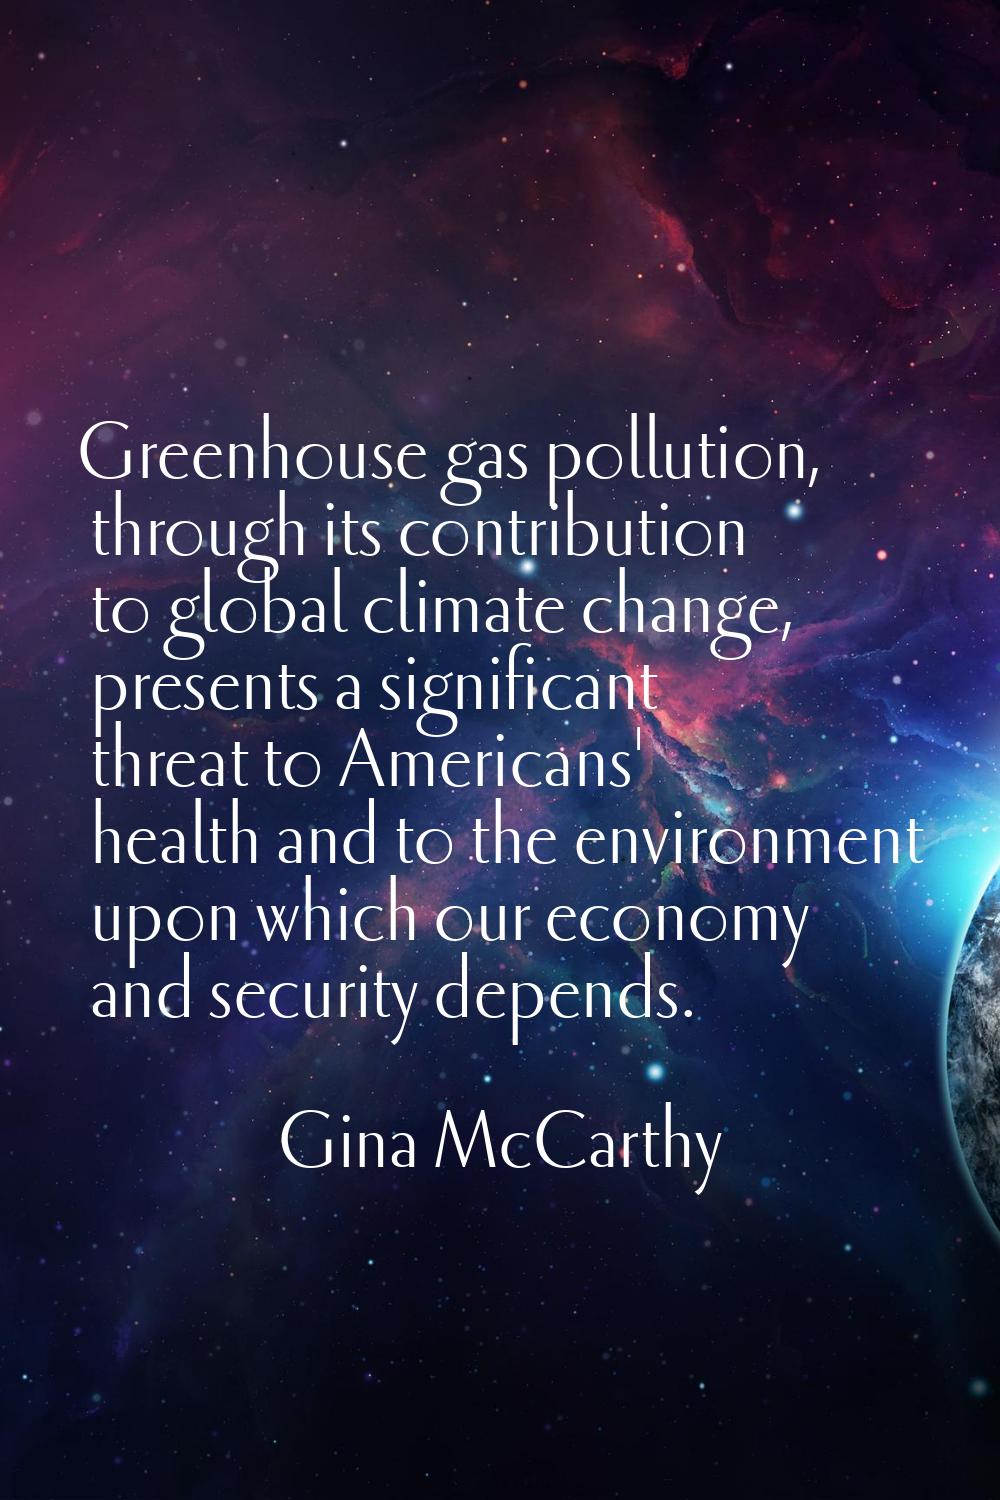 Greenhouse gas pollution, through its contribution to global climate change, presents a significant